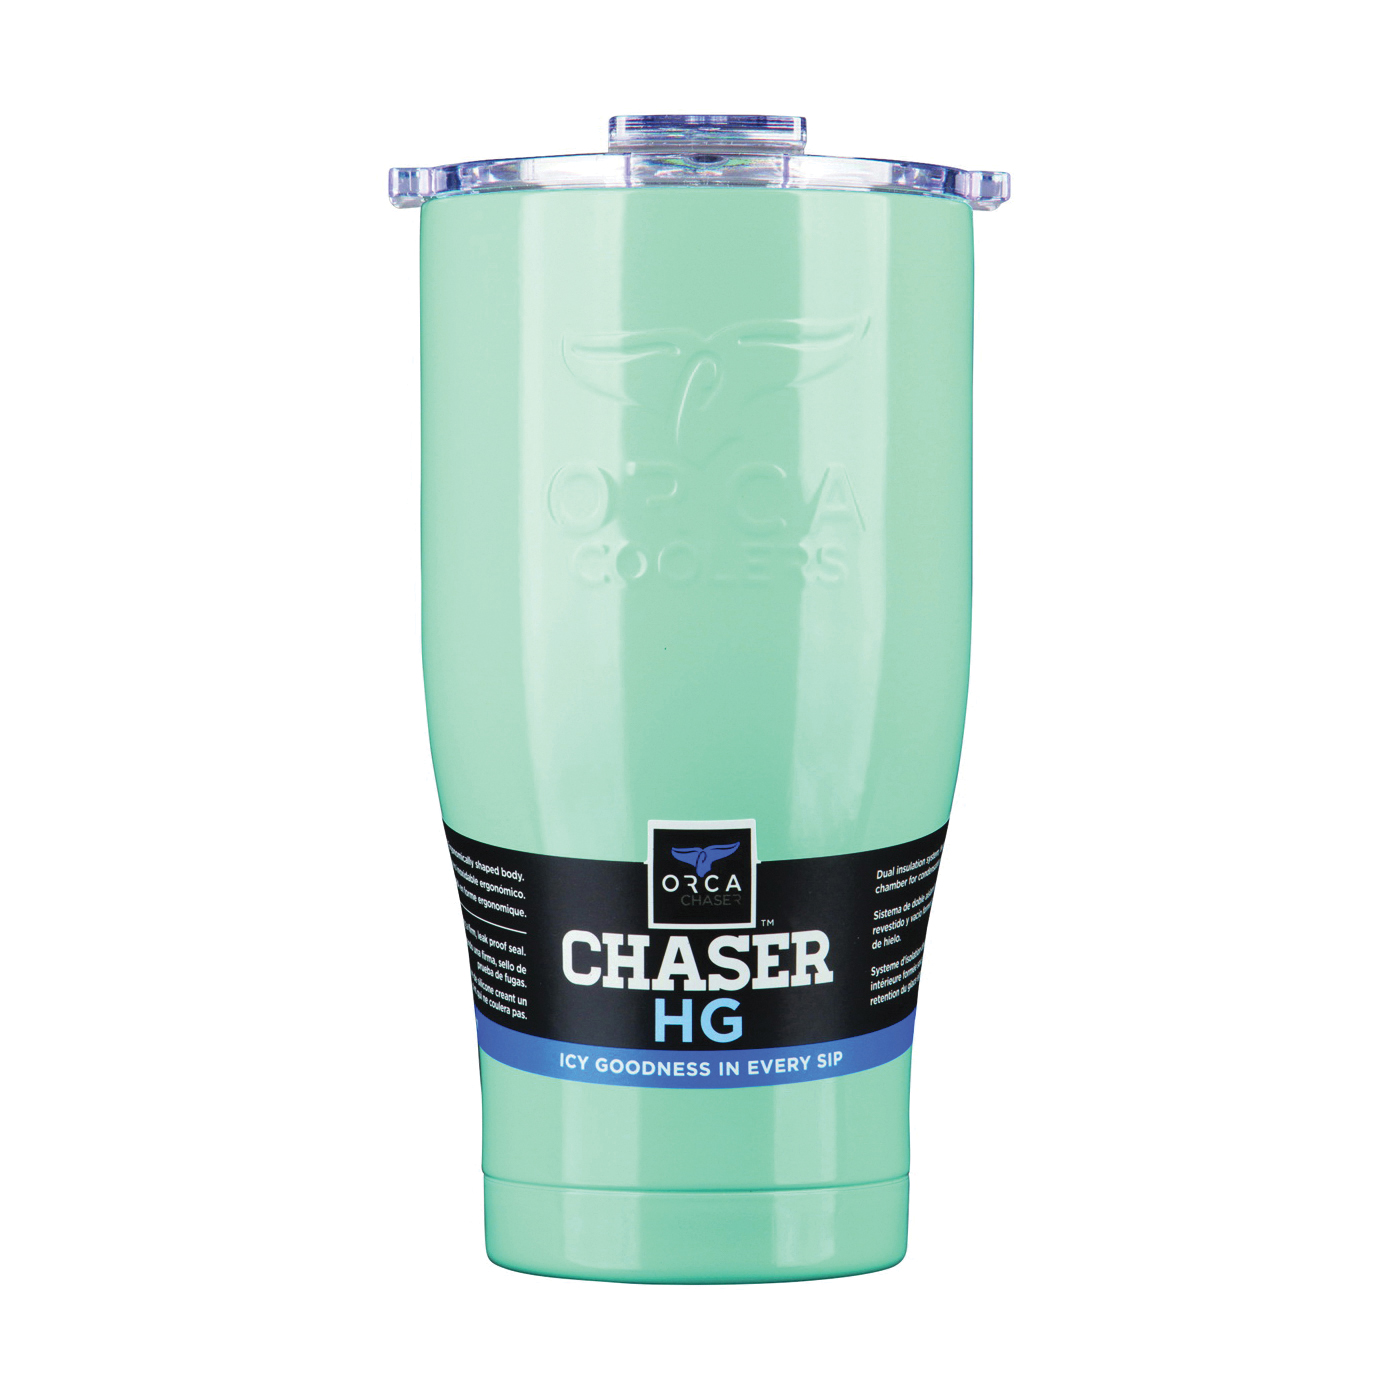 Chaser Series ORCCHA27SF/CL Tumbler, 27 oz, Stainless Steel, Seafoam